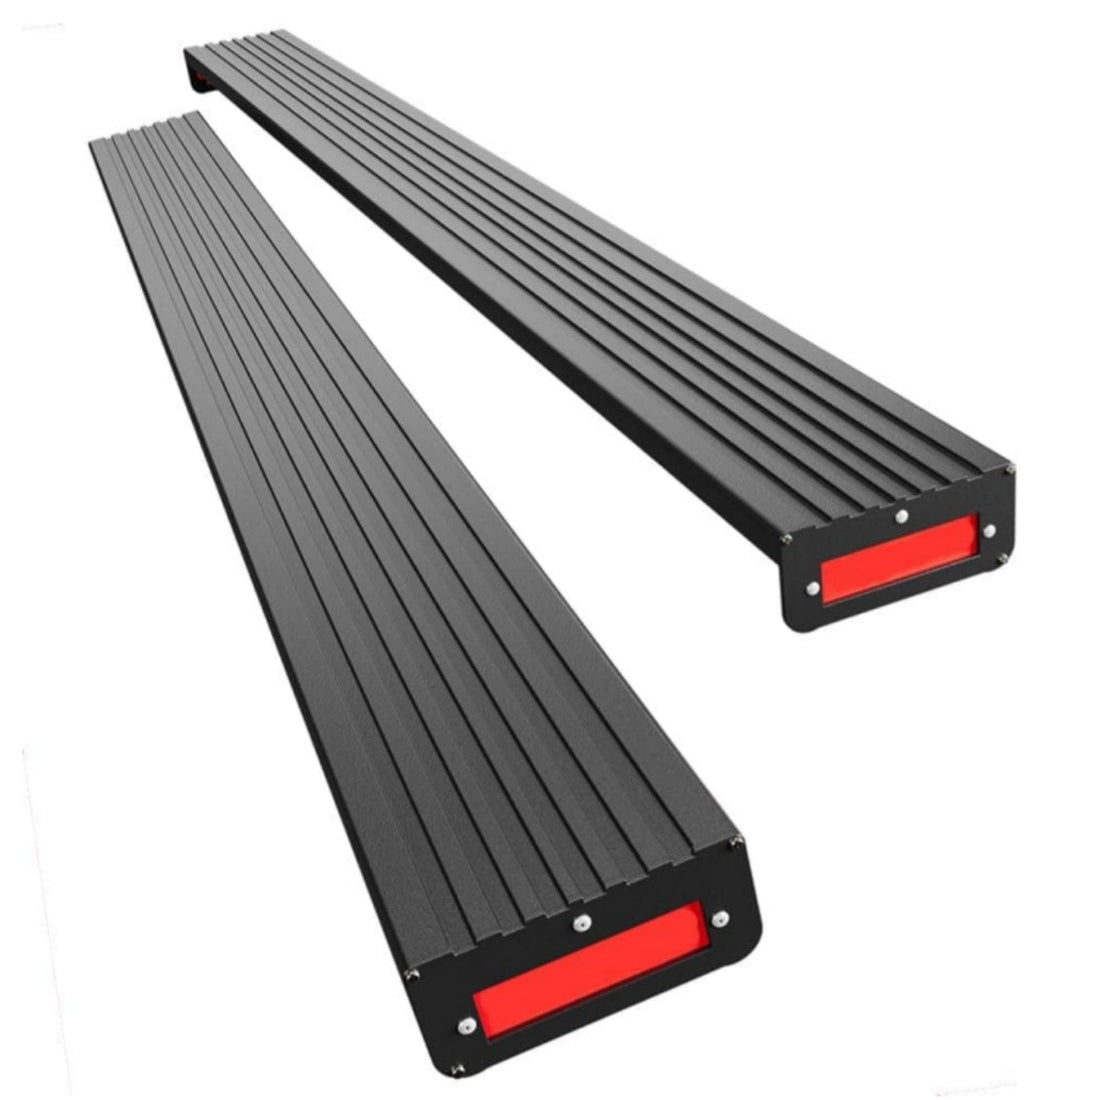 Running Boards 6.5 Inches Compatible with 2009-2023 Dodge Ram 1500 Quad Cab(2019-2023 Ram 1500 Classic Only),Aluminum Side Steps for 2009-2023 Dodge Ram 1500 Quad Cab